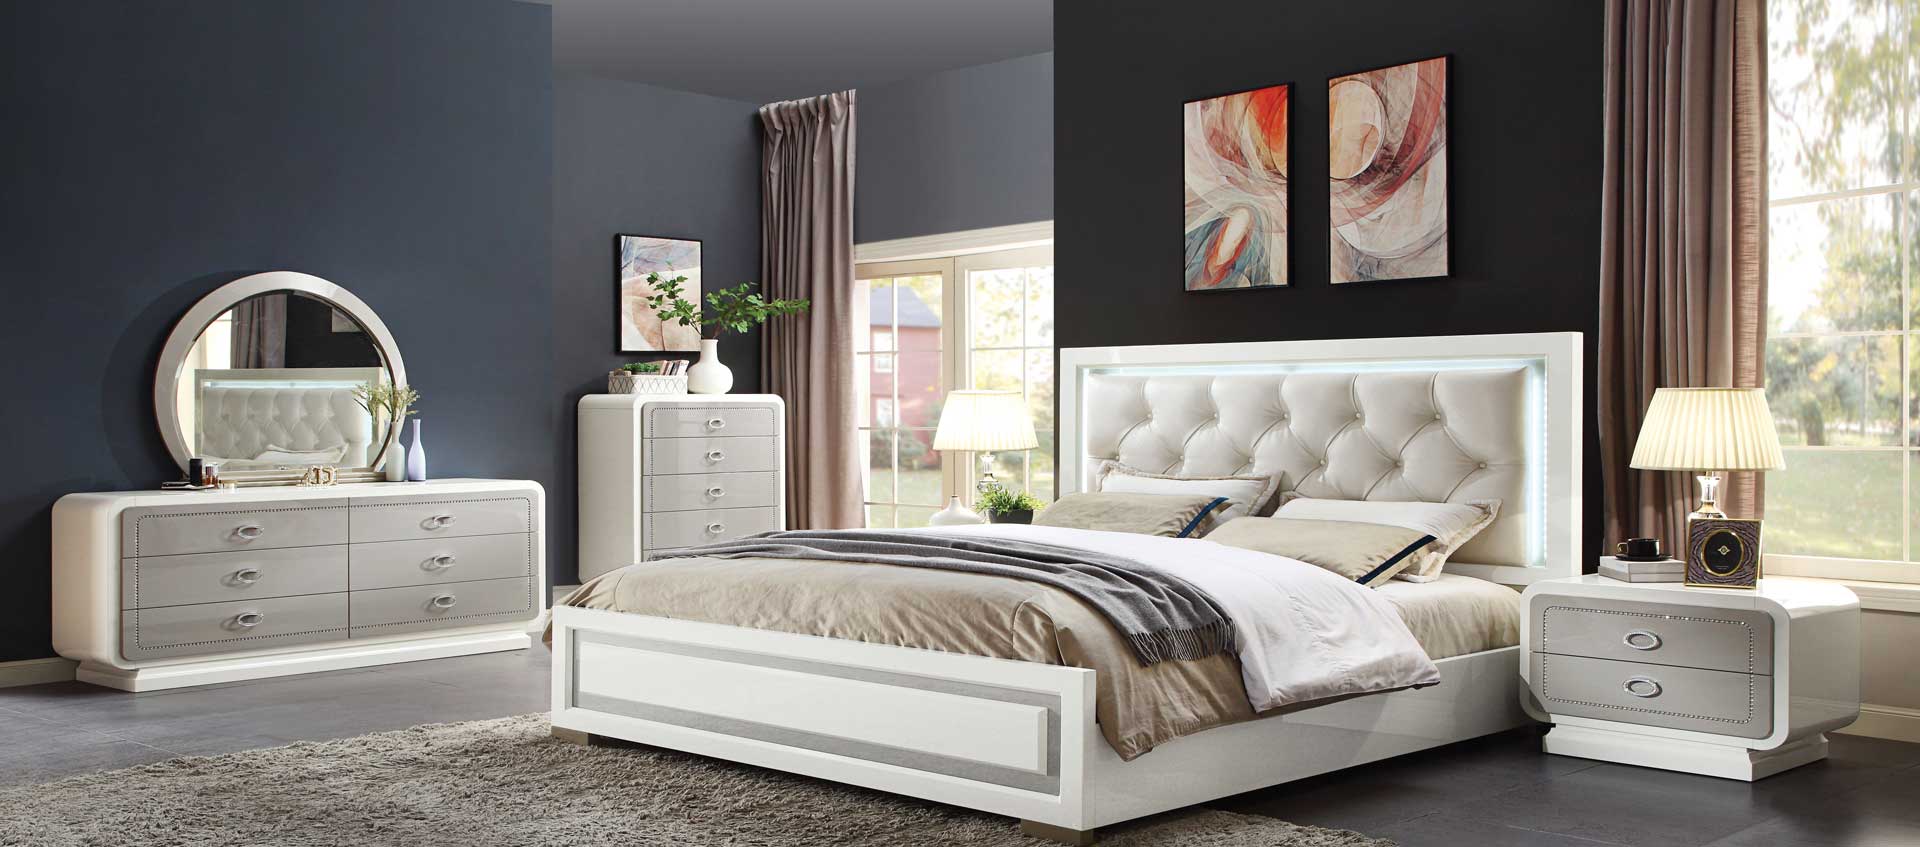 personalized bedroom furniture stores